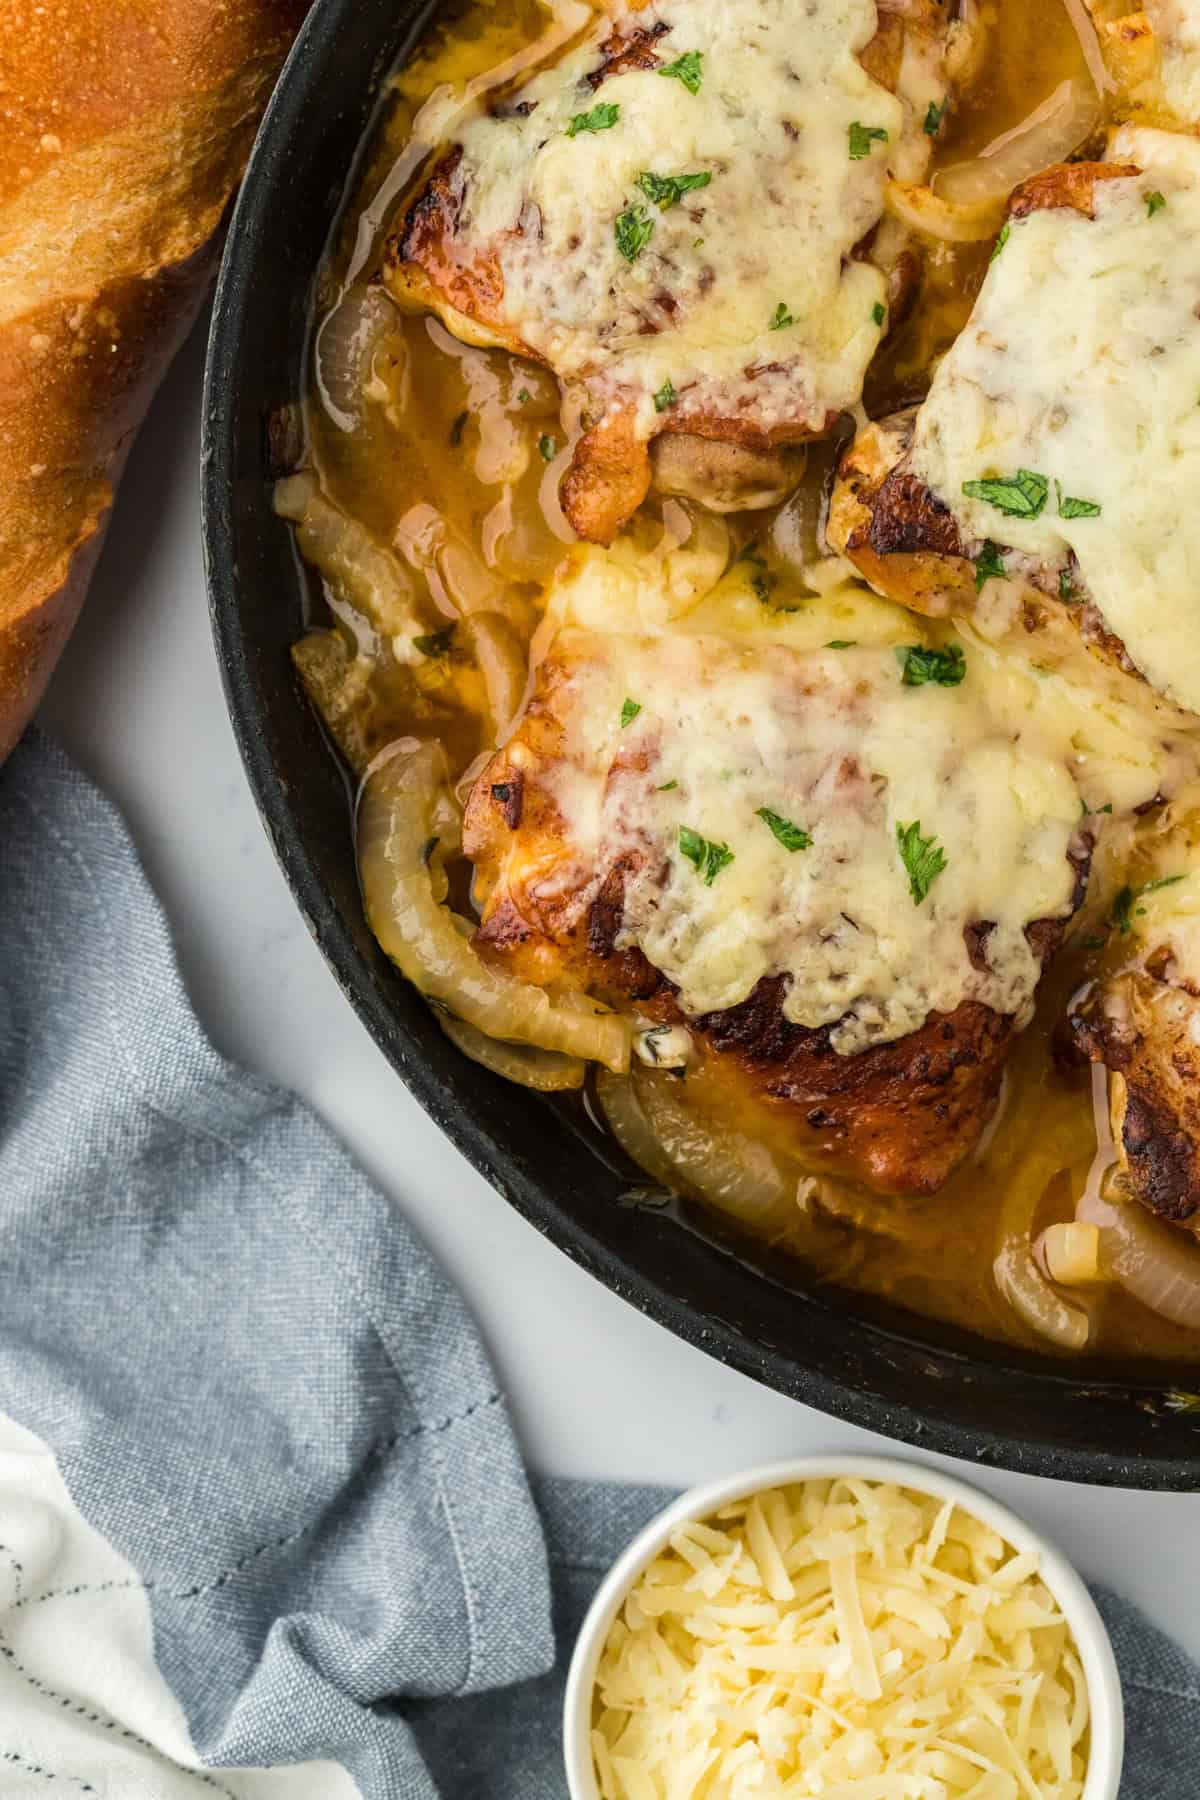 Closeup of french onion chicken in a skillet on a white background. Next to it there are ingredients like shredded cheese, and toasted baguette slices